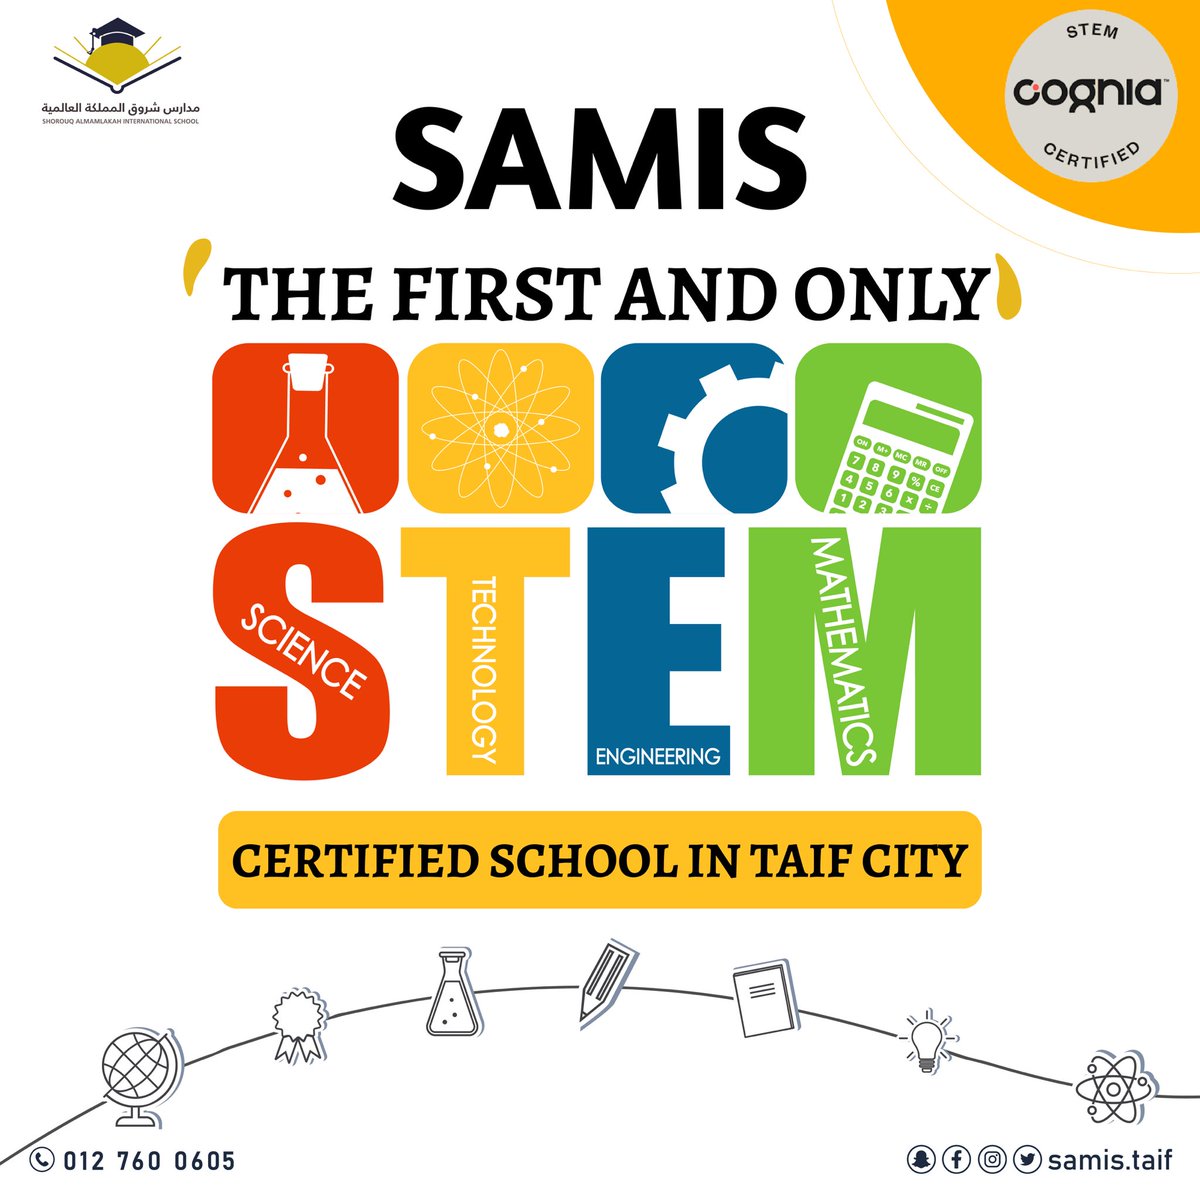 🌟 Exciting News Alert! 🌟 
Our school has officially become the FIRST and ONLY STEM certified school in Taif City, thanks to our recent certification by Cognia! 🚀🔬 This prestigious achievement showcases our commitment to excellence in science, technology, engineering, and